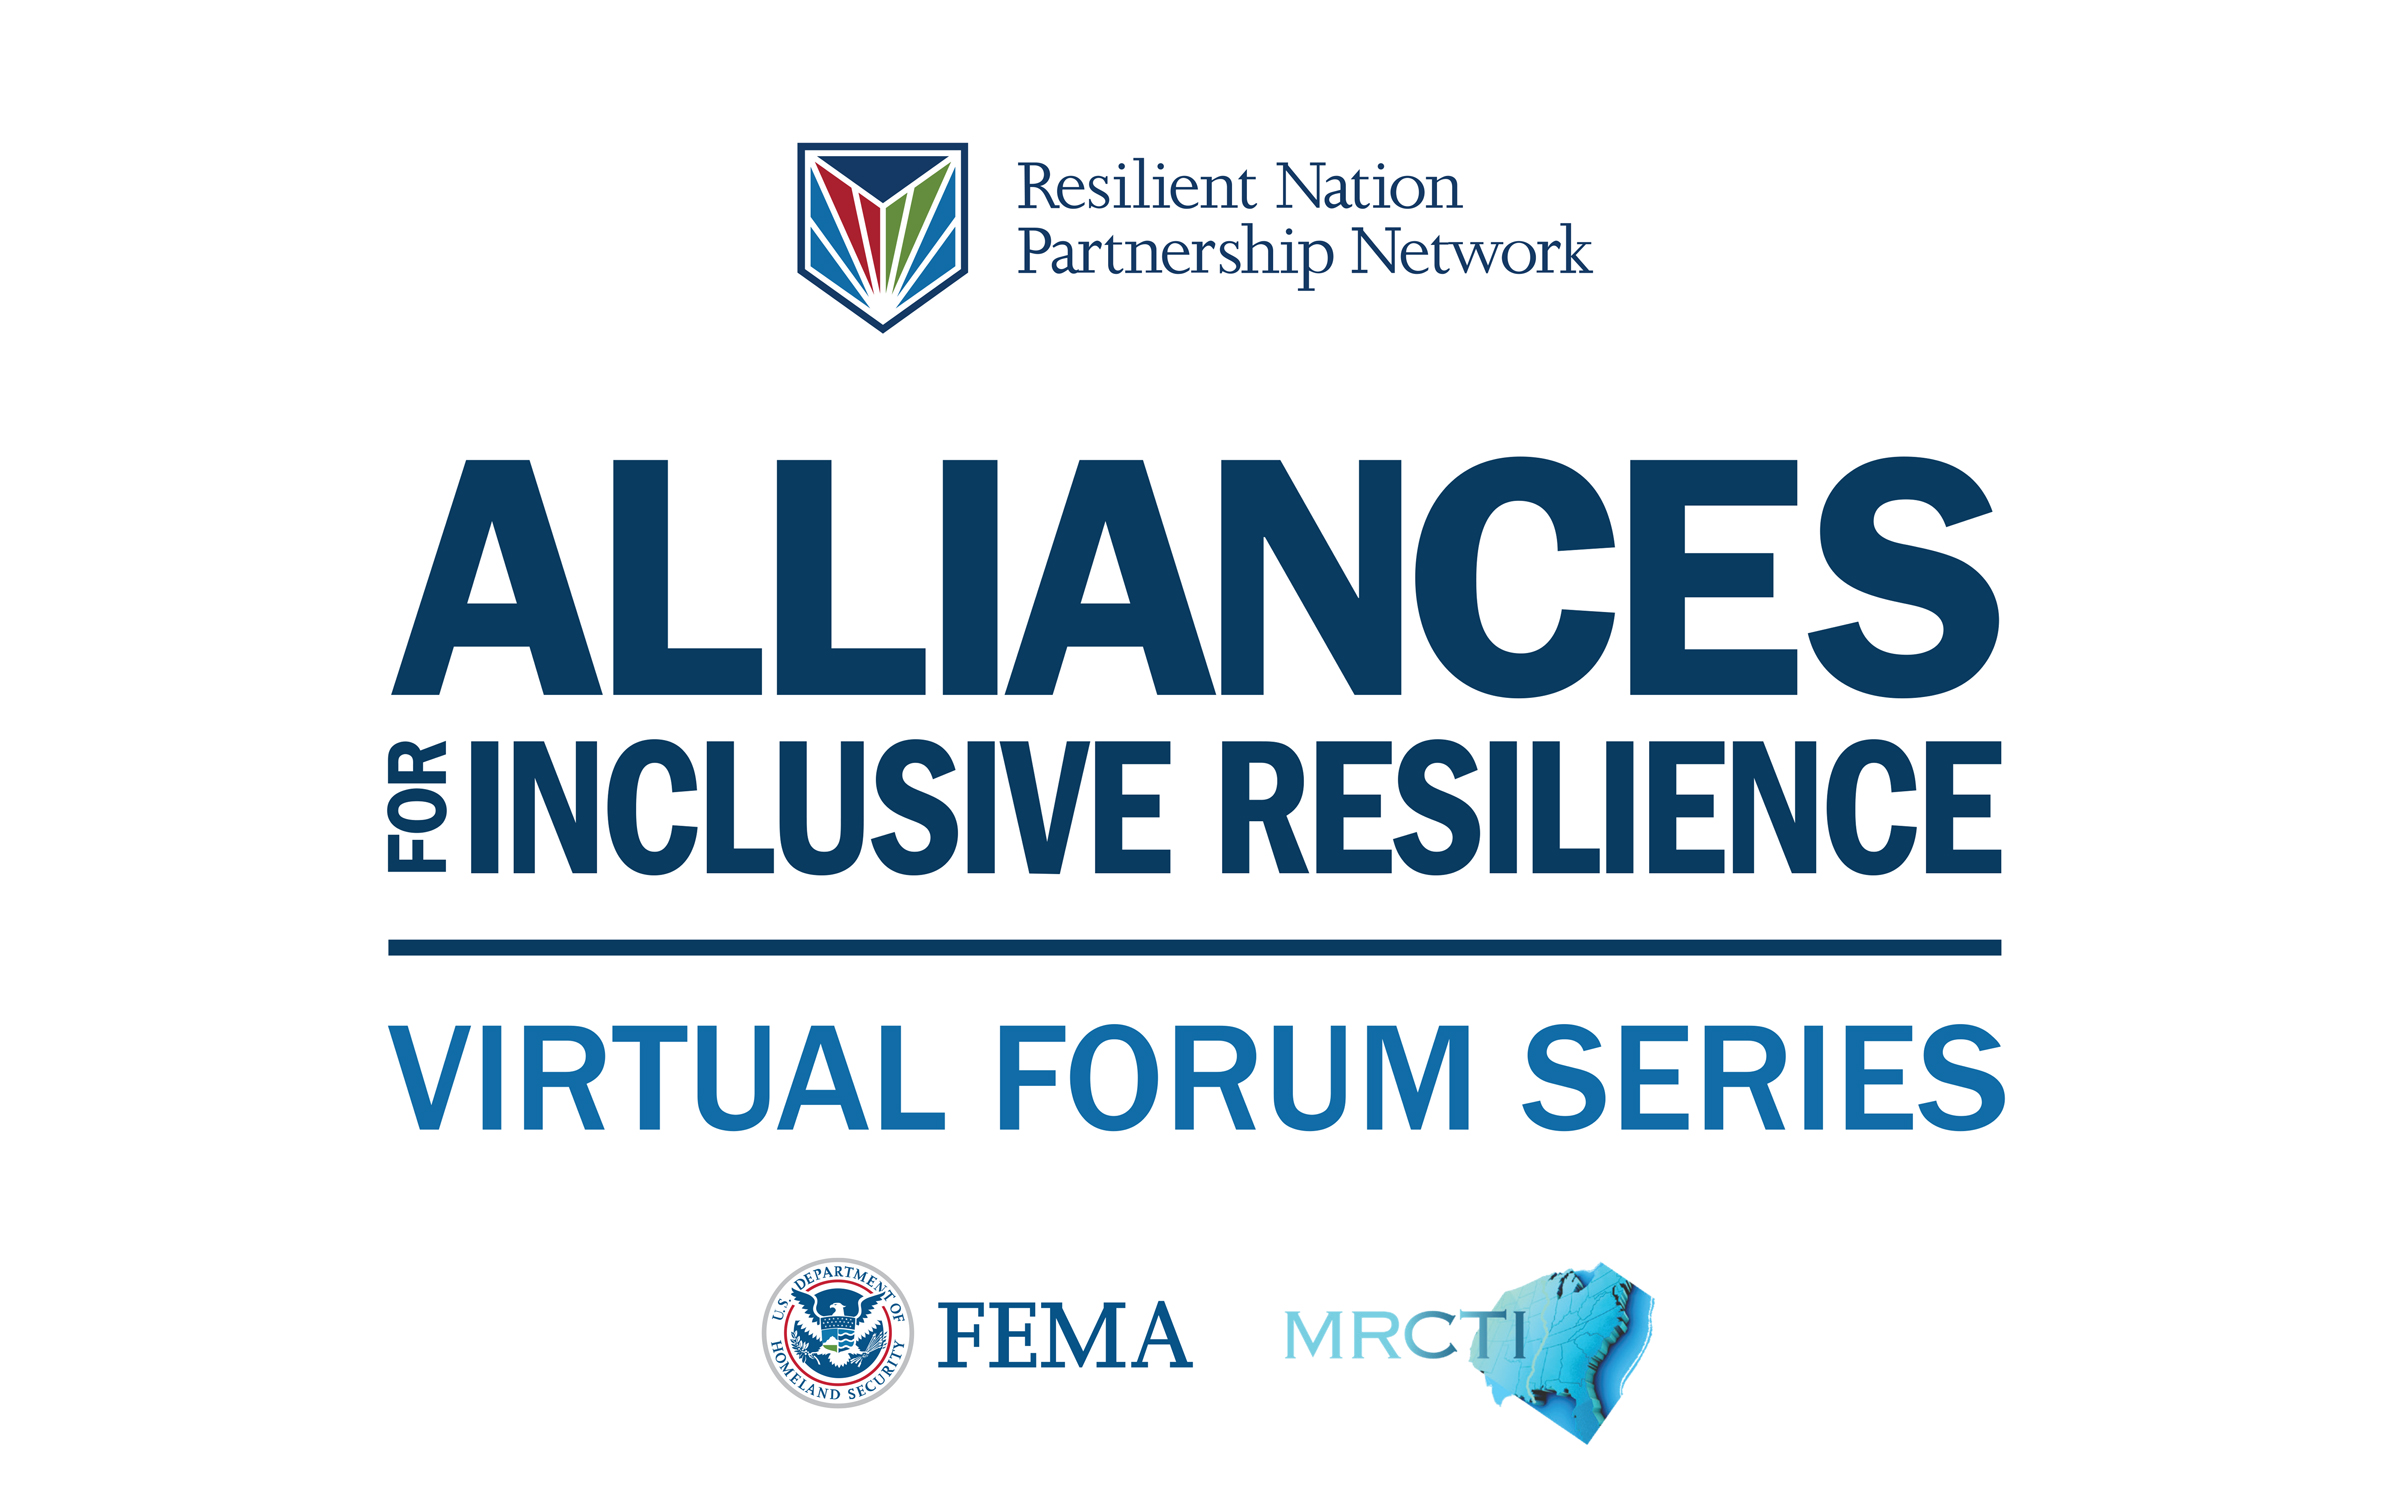 Thumbnail image for Alliances for Inclusive Resilience